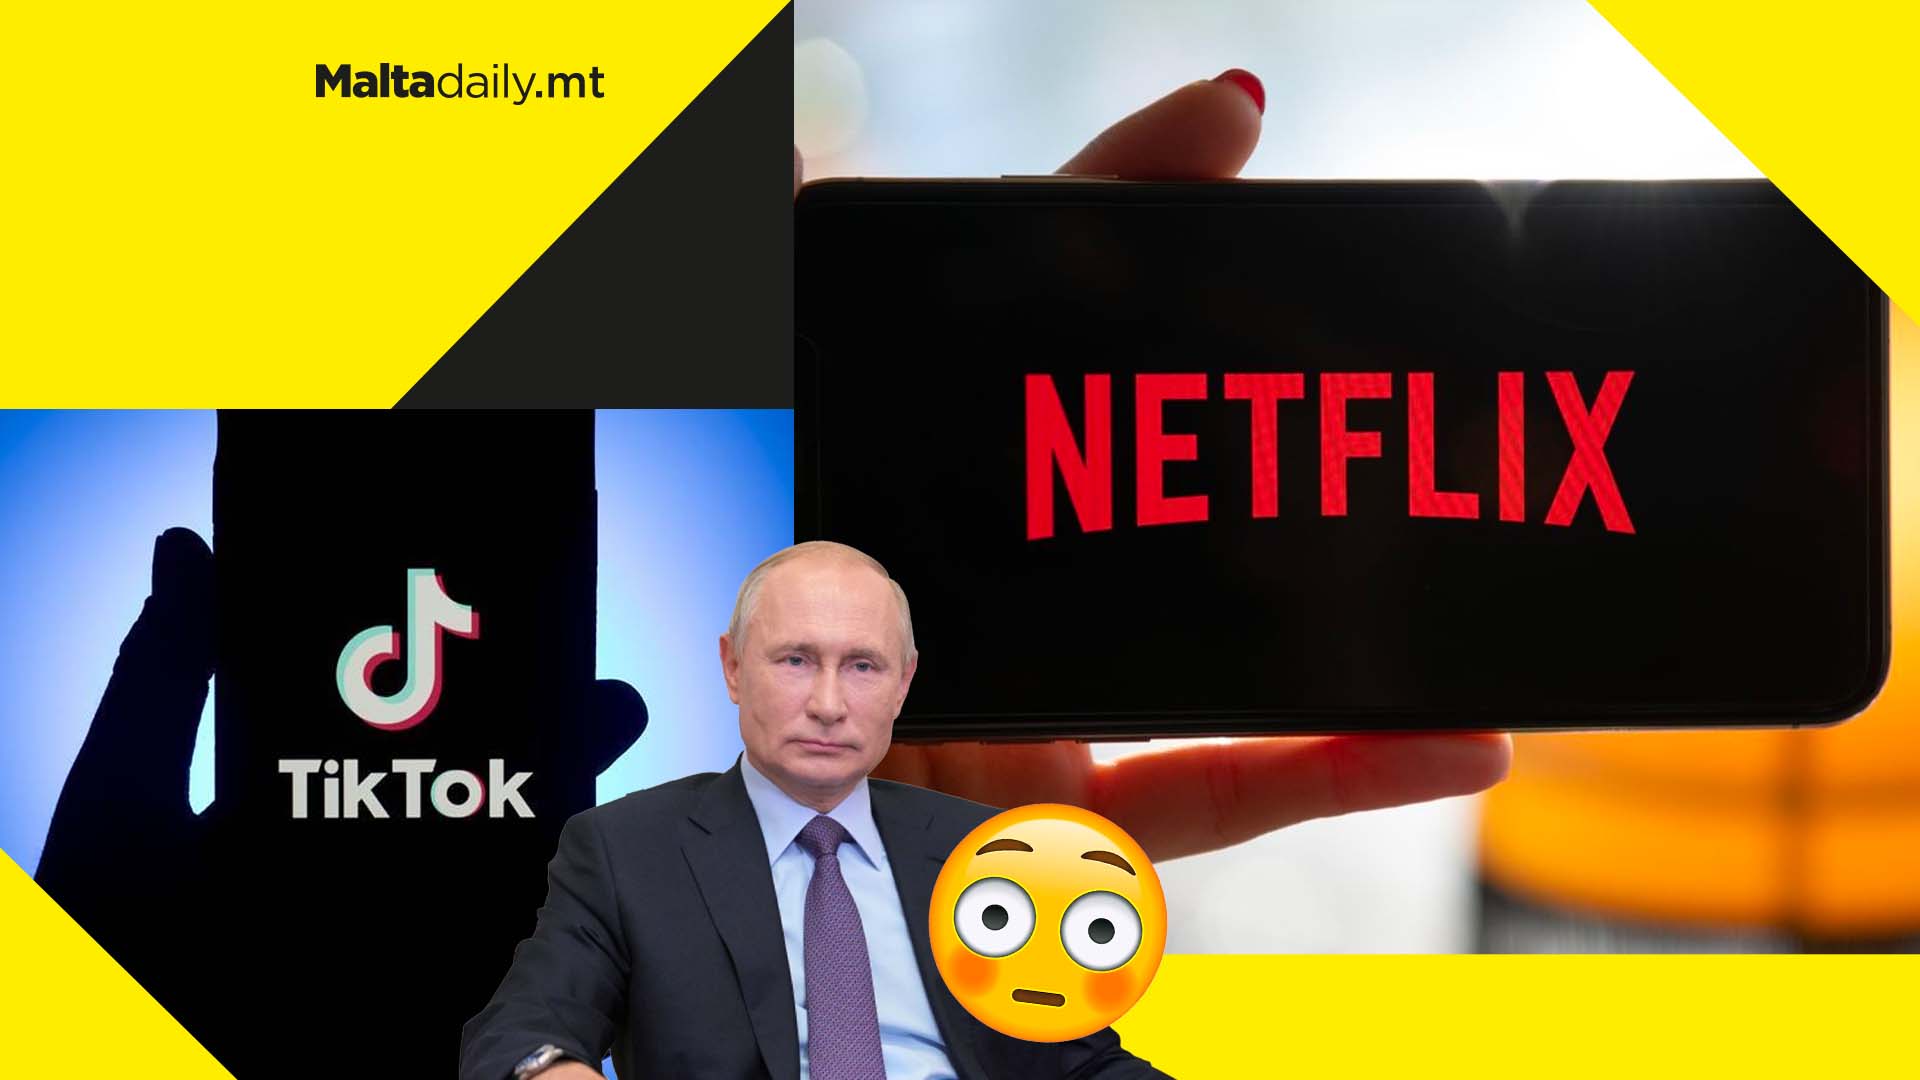 TikTok and Netflix shut down services in Russia as sanctions continue